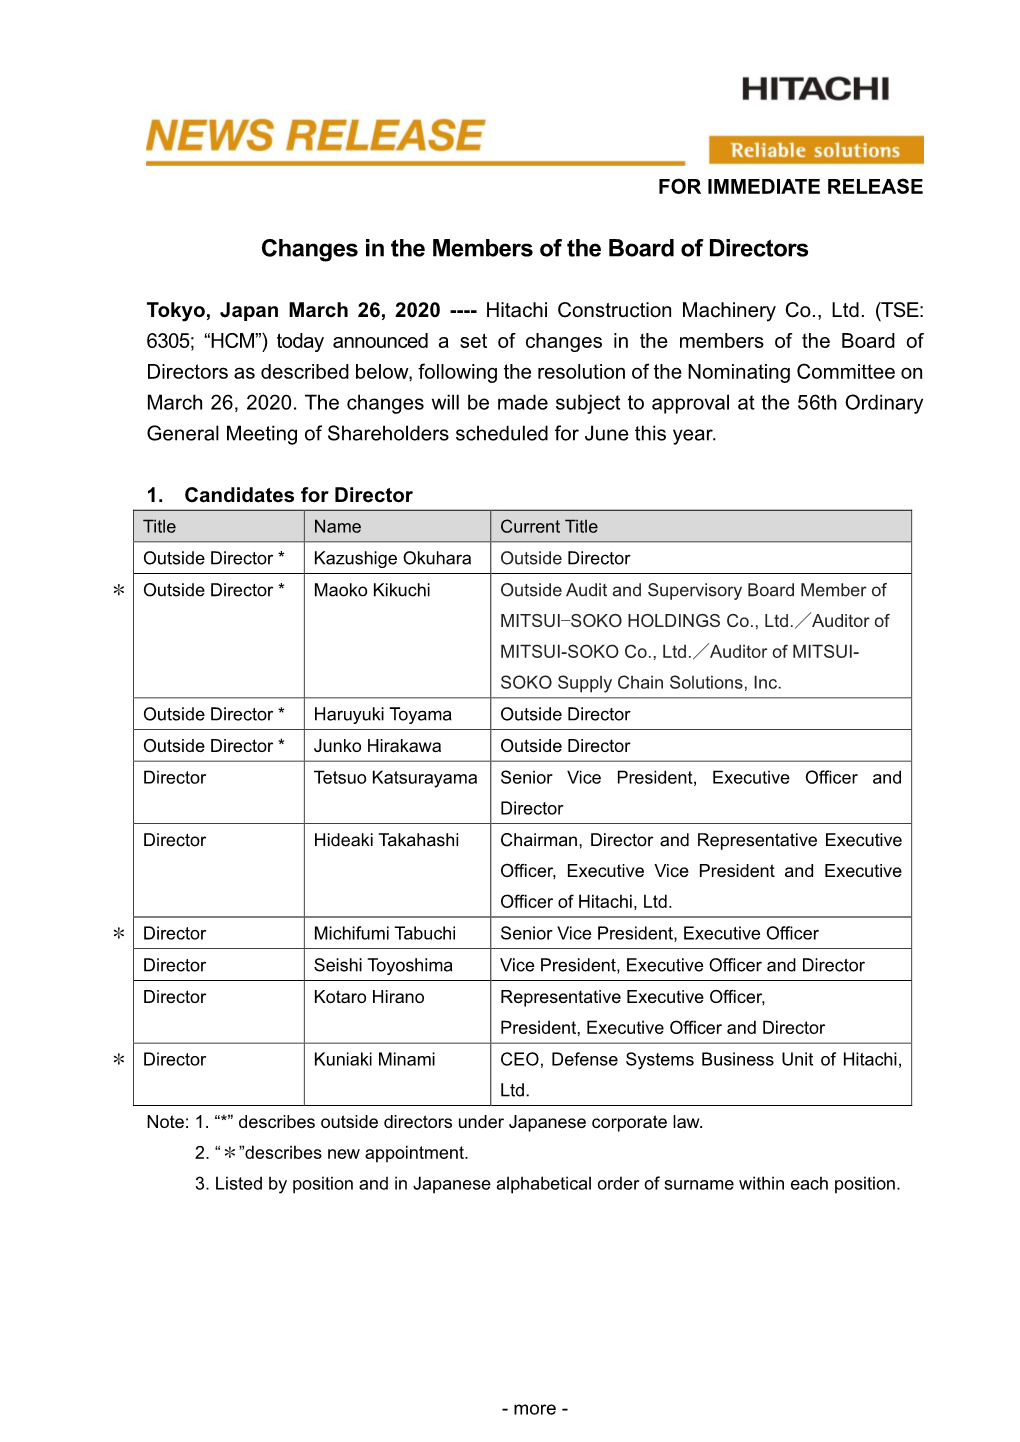 Changes in the Members of the Board of Directors